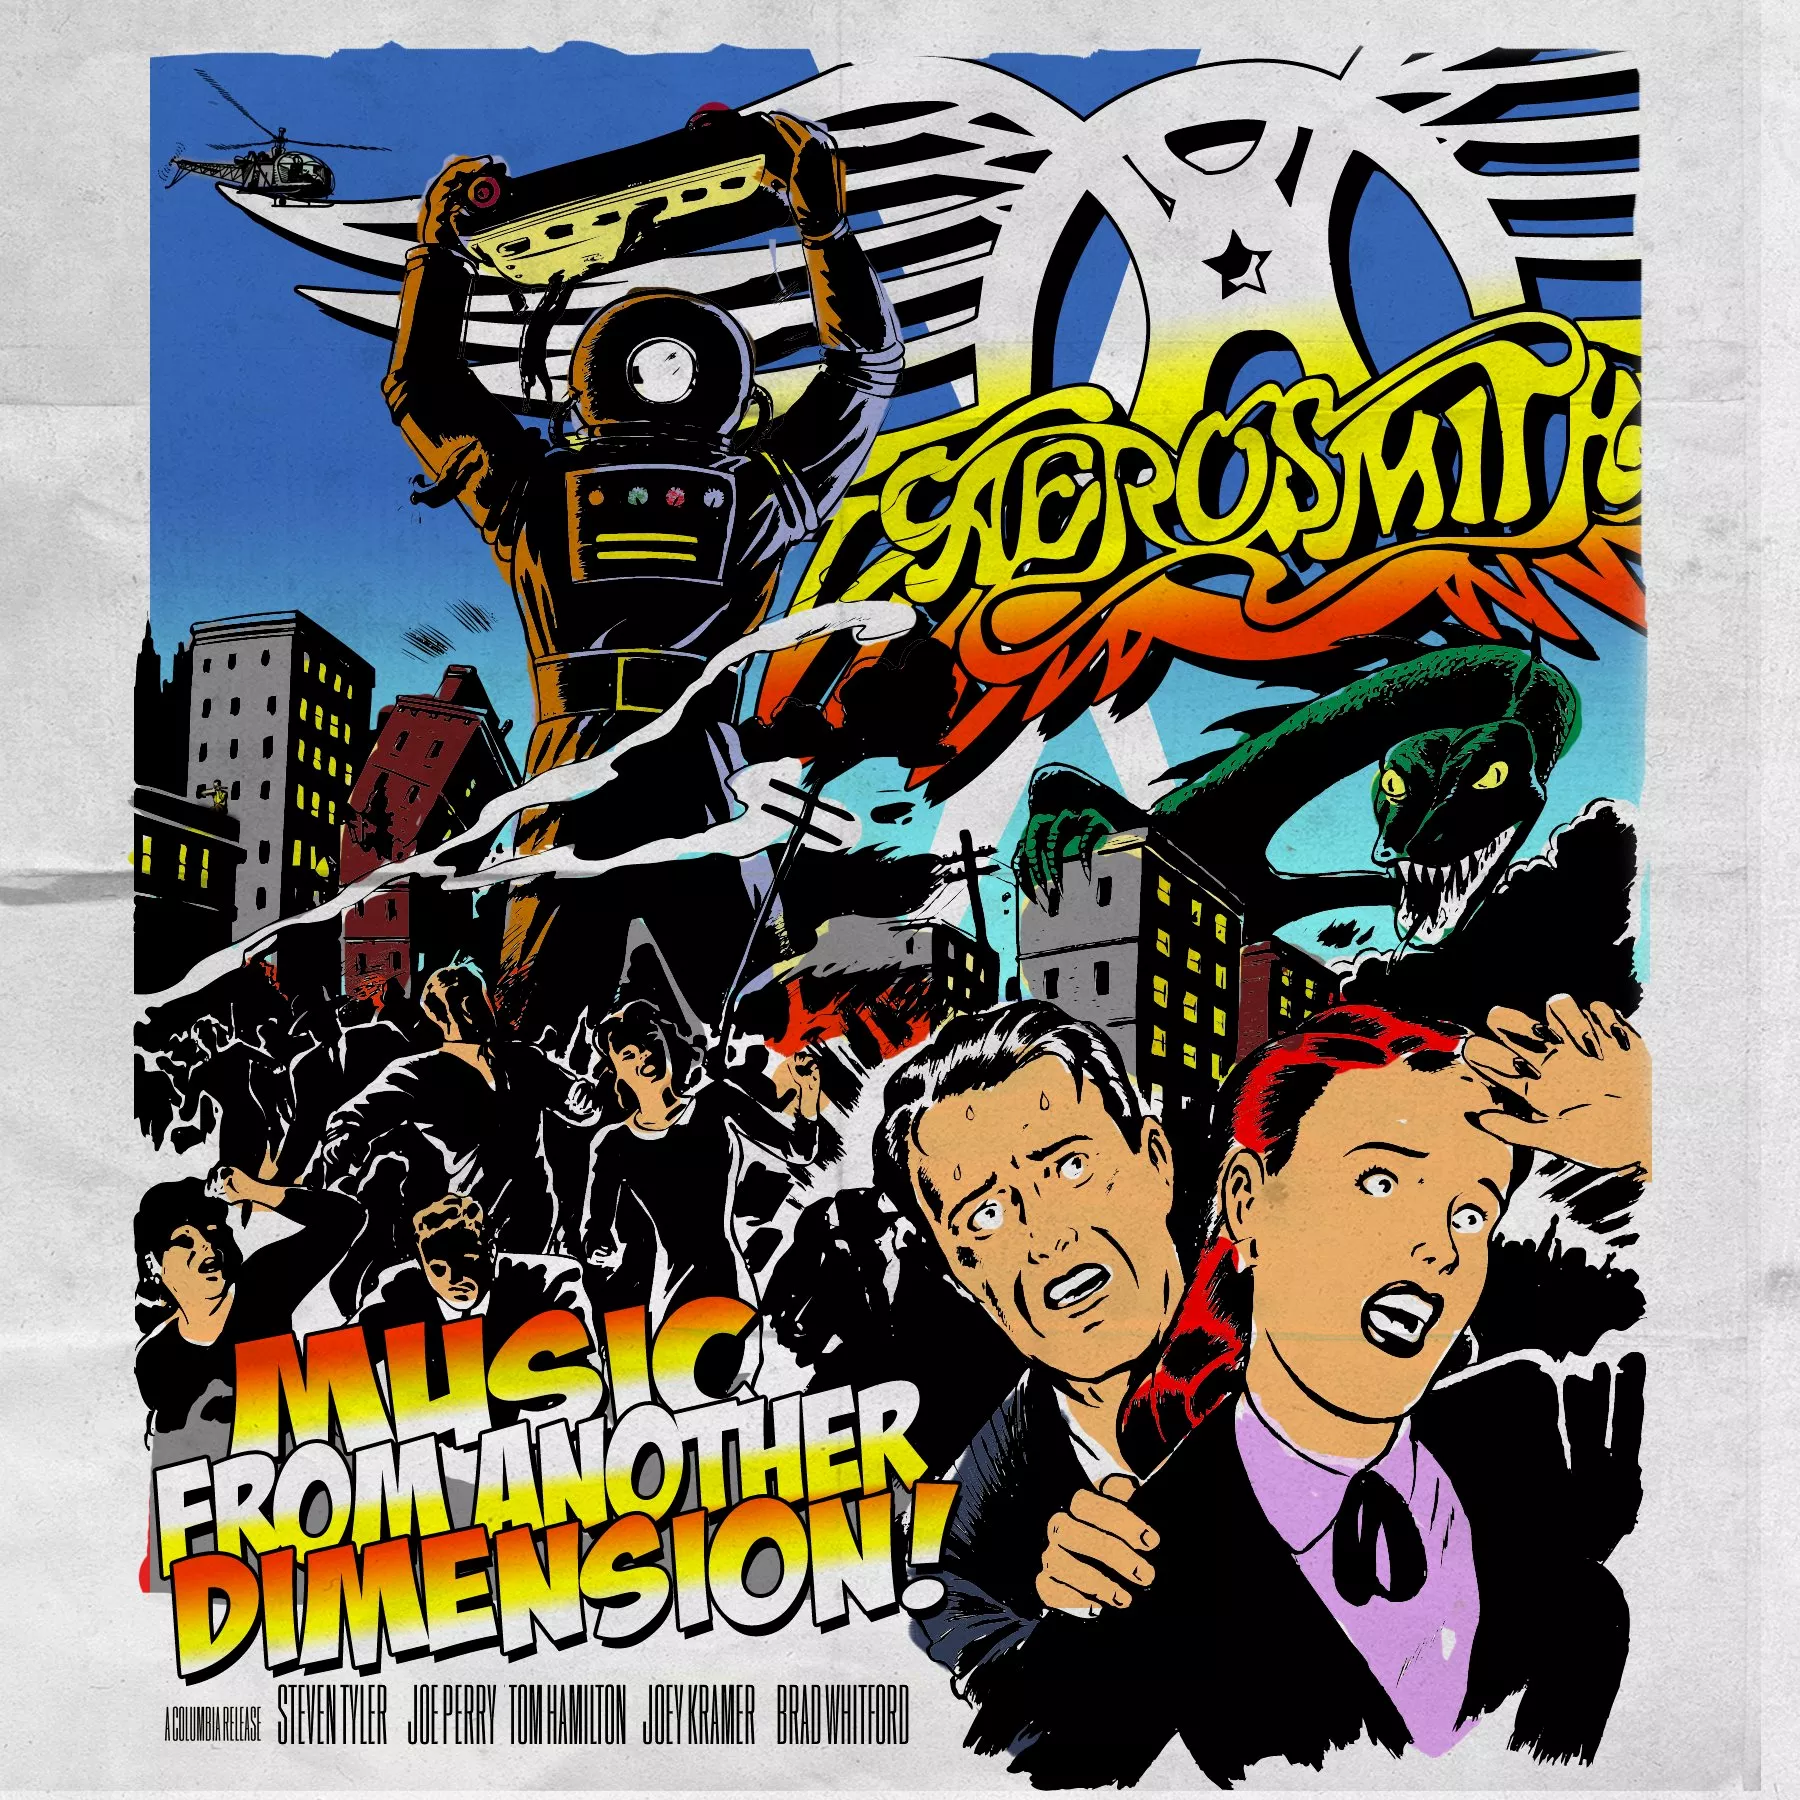 Music From Another Dimension! - Aerosmith